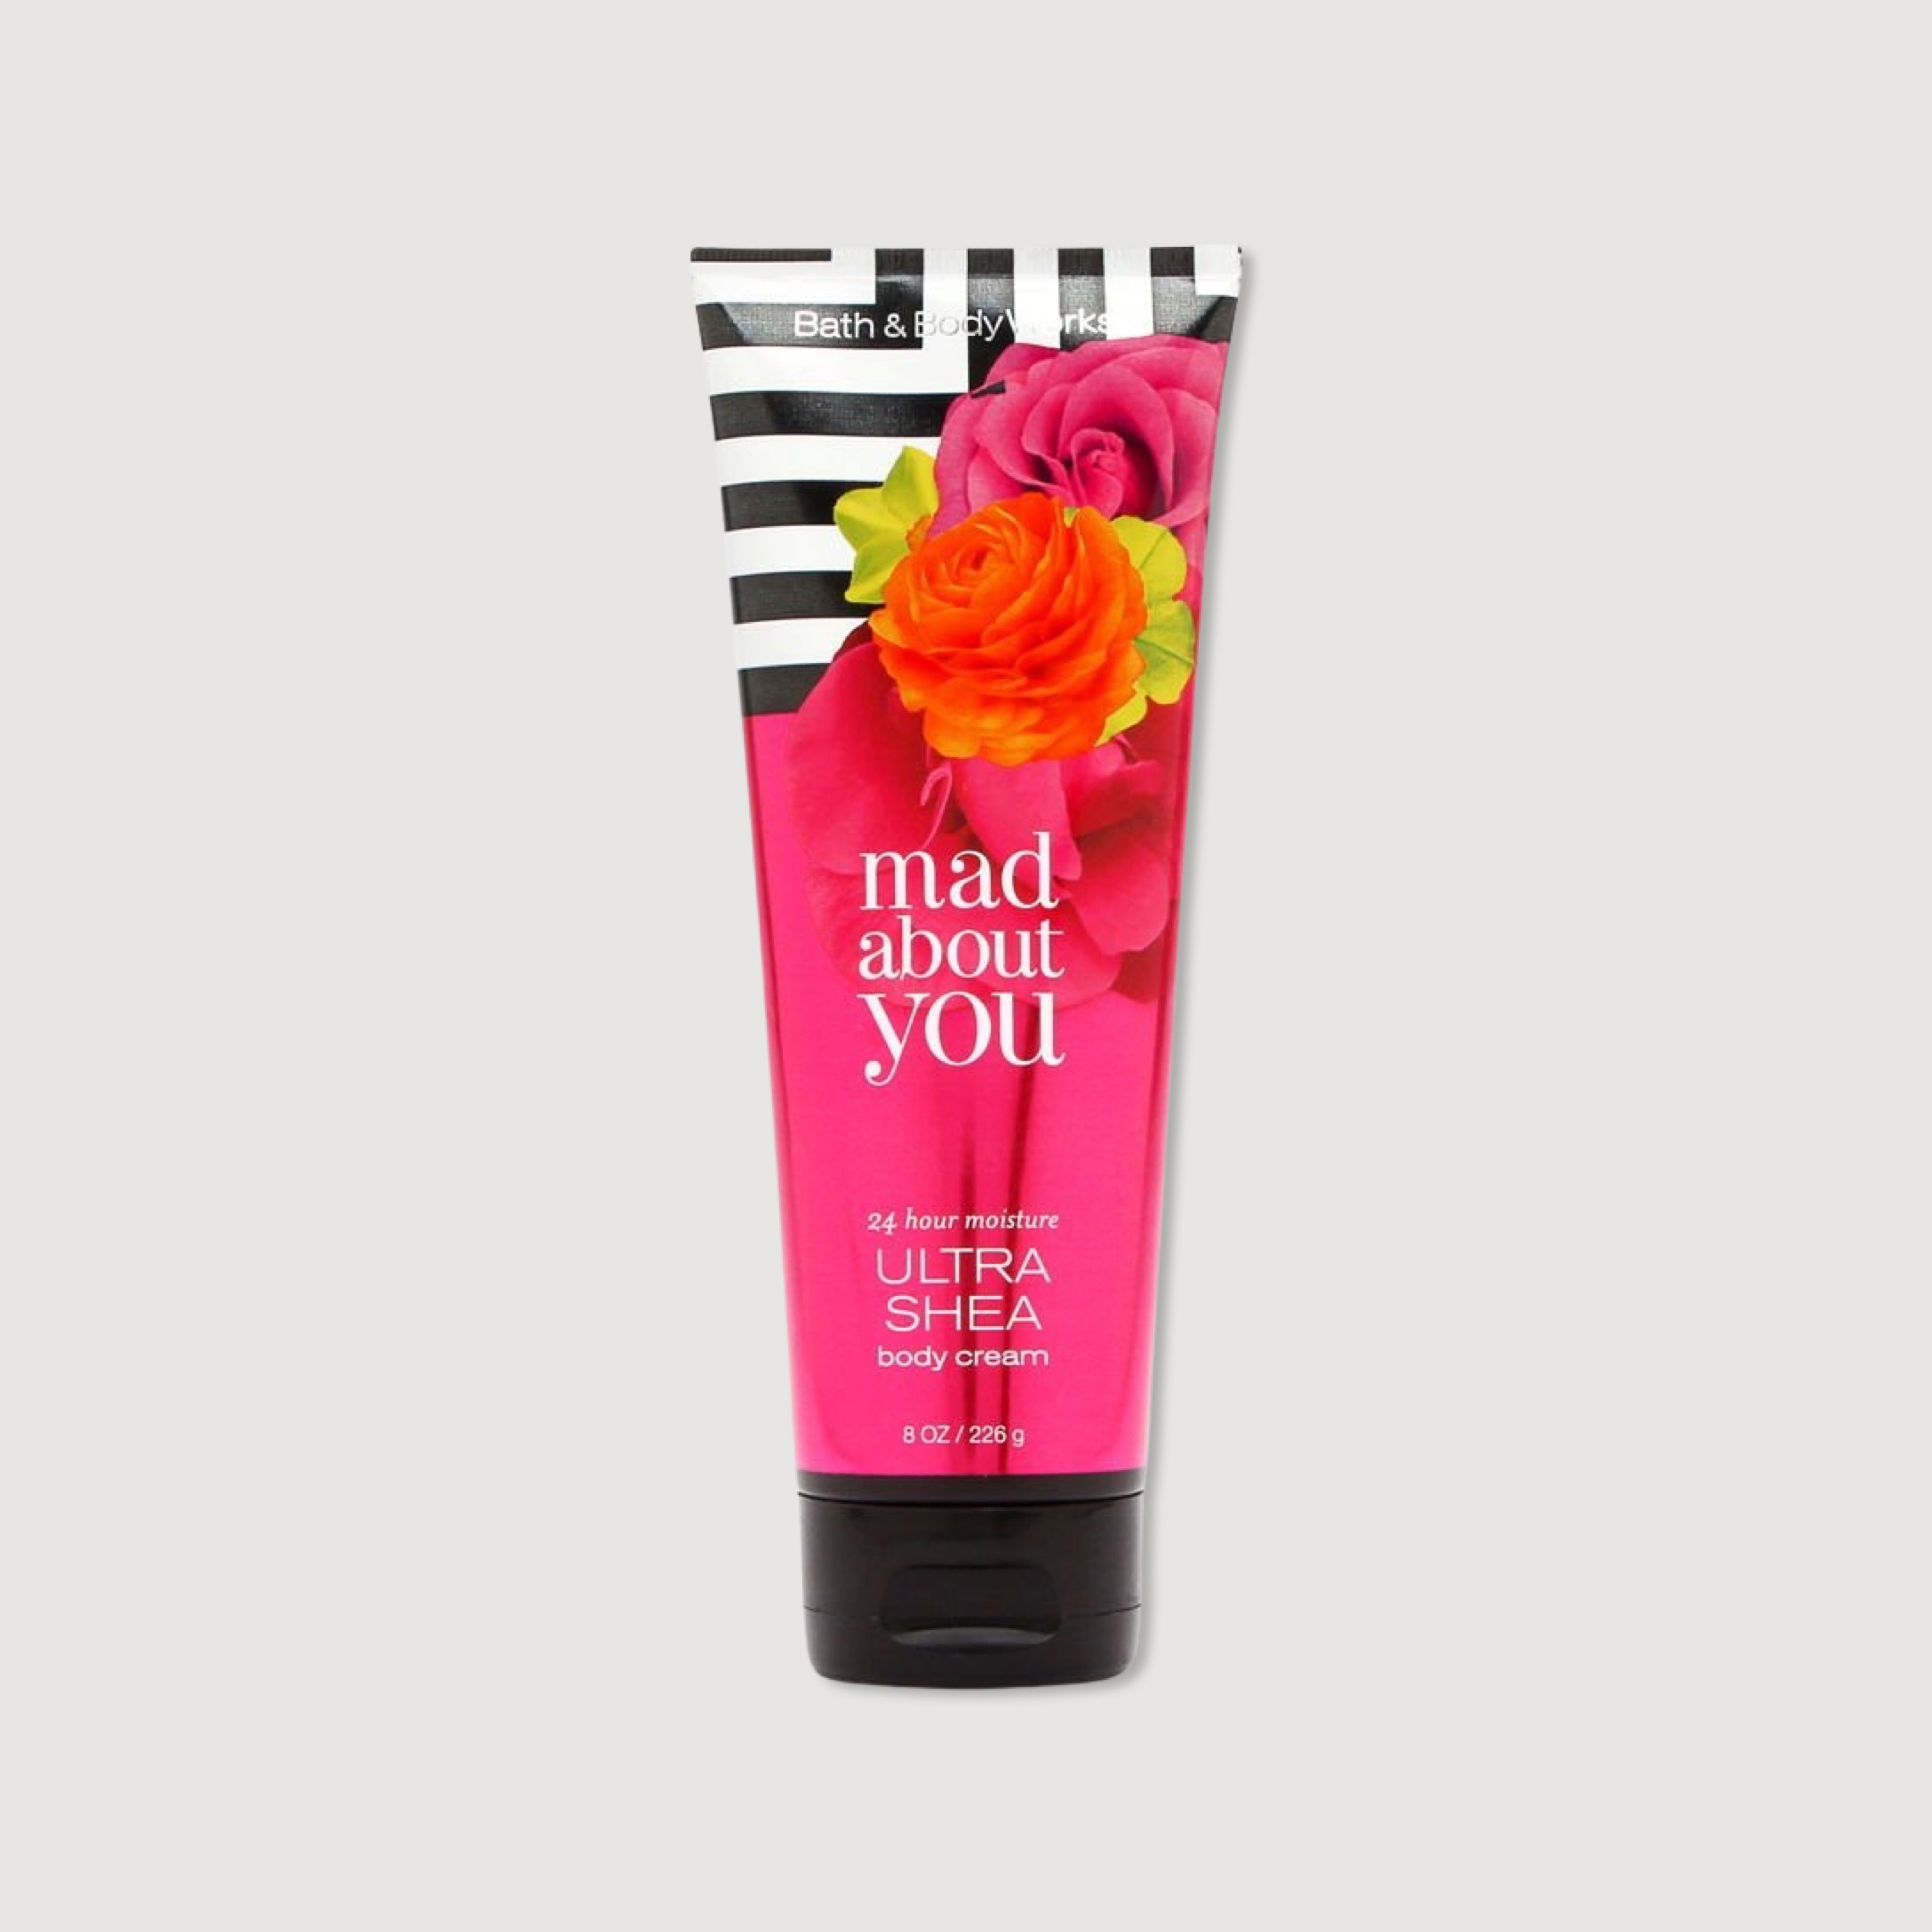 Mad About You - Bath & Body Works